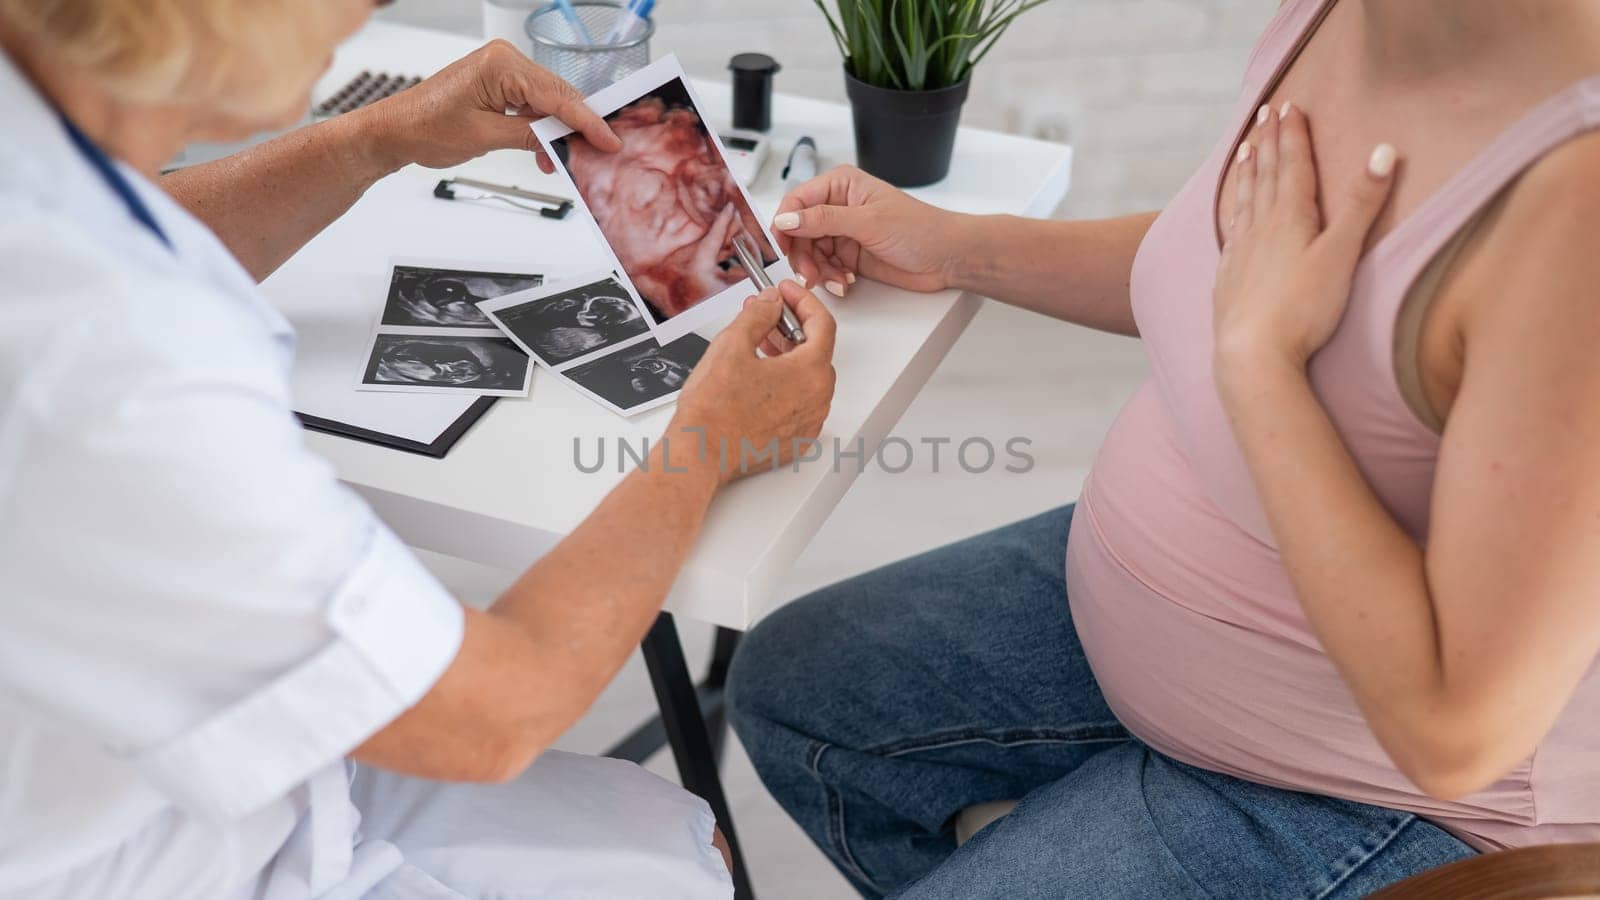 Obstetrician gynecologist explaining the screening picture to a pregnant woman